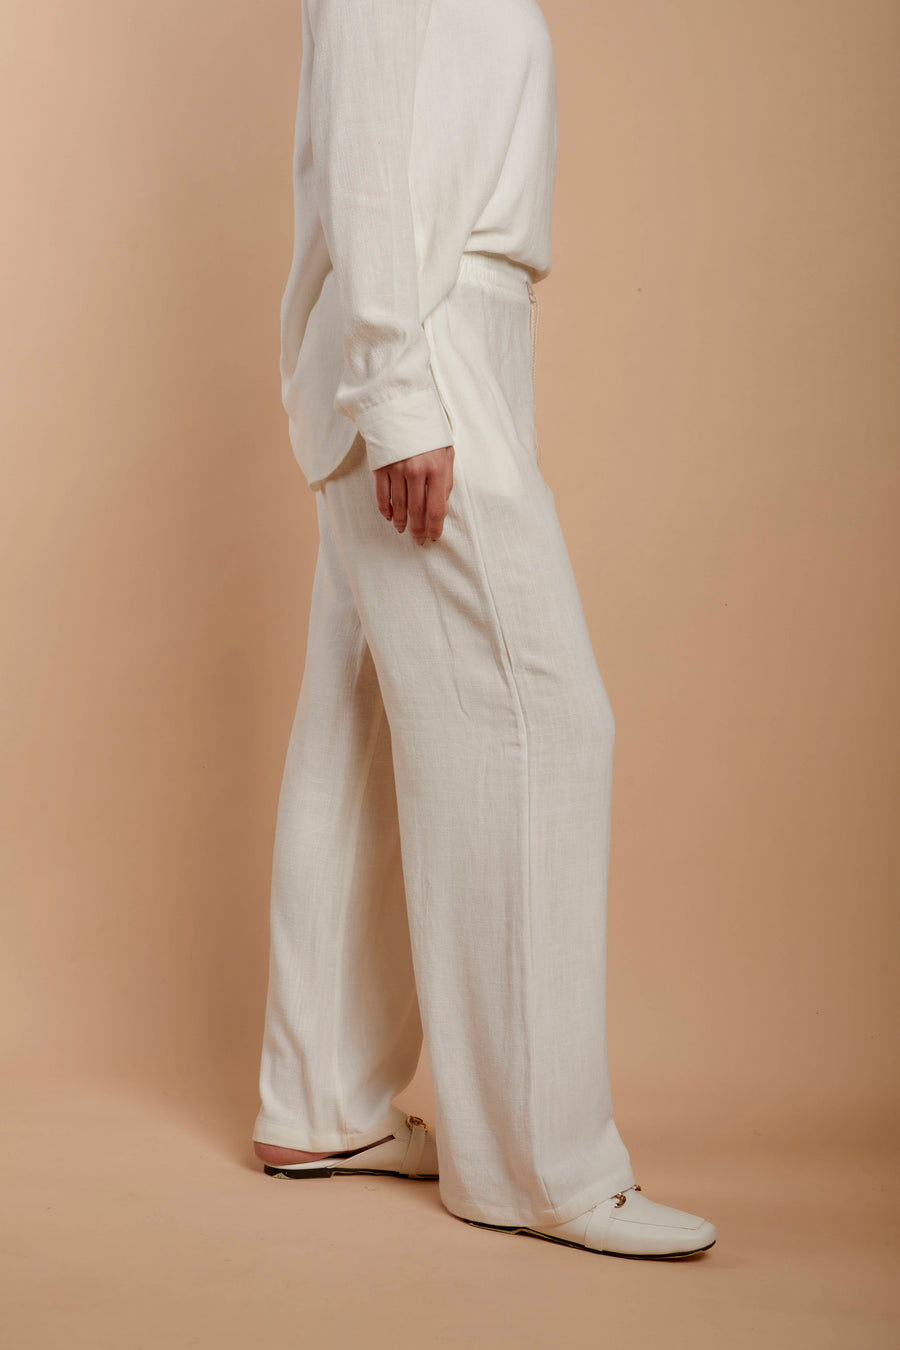 Off-White Soft Linen Pants (extra coating)